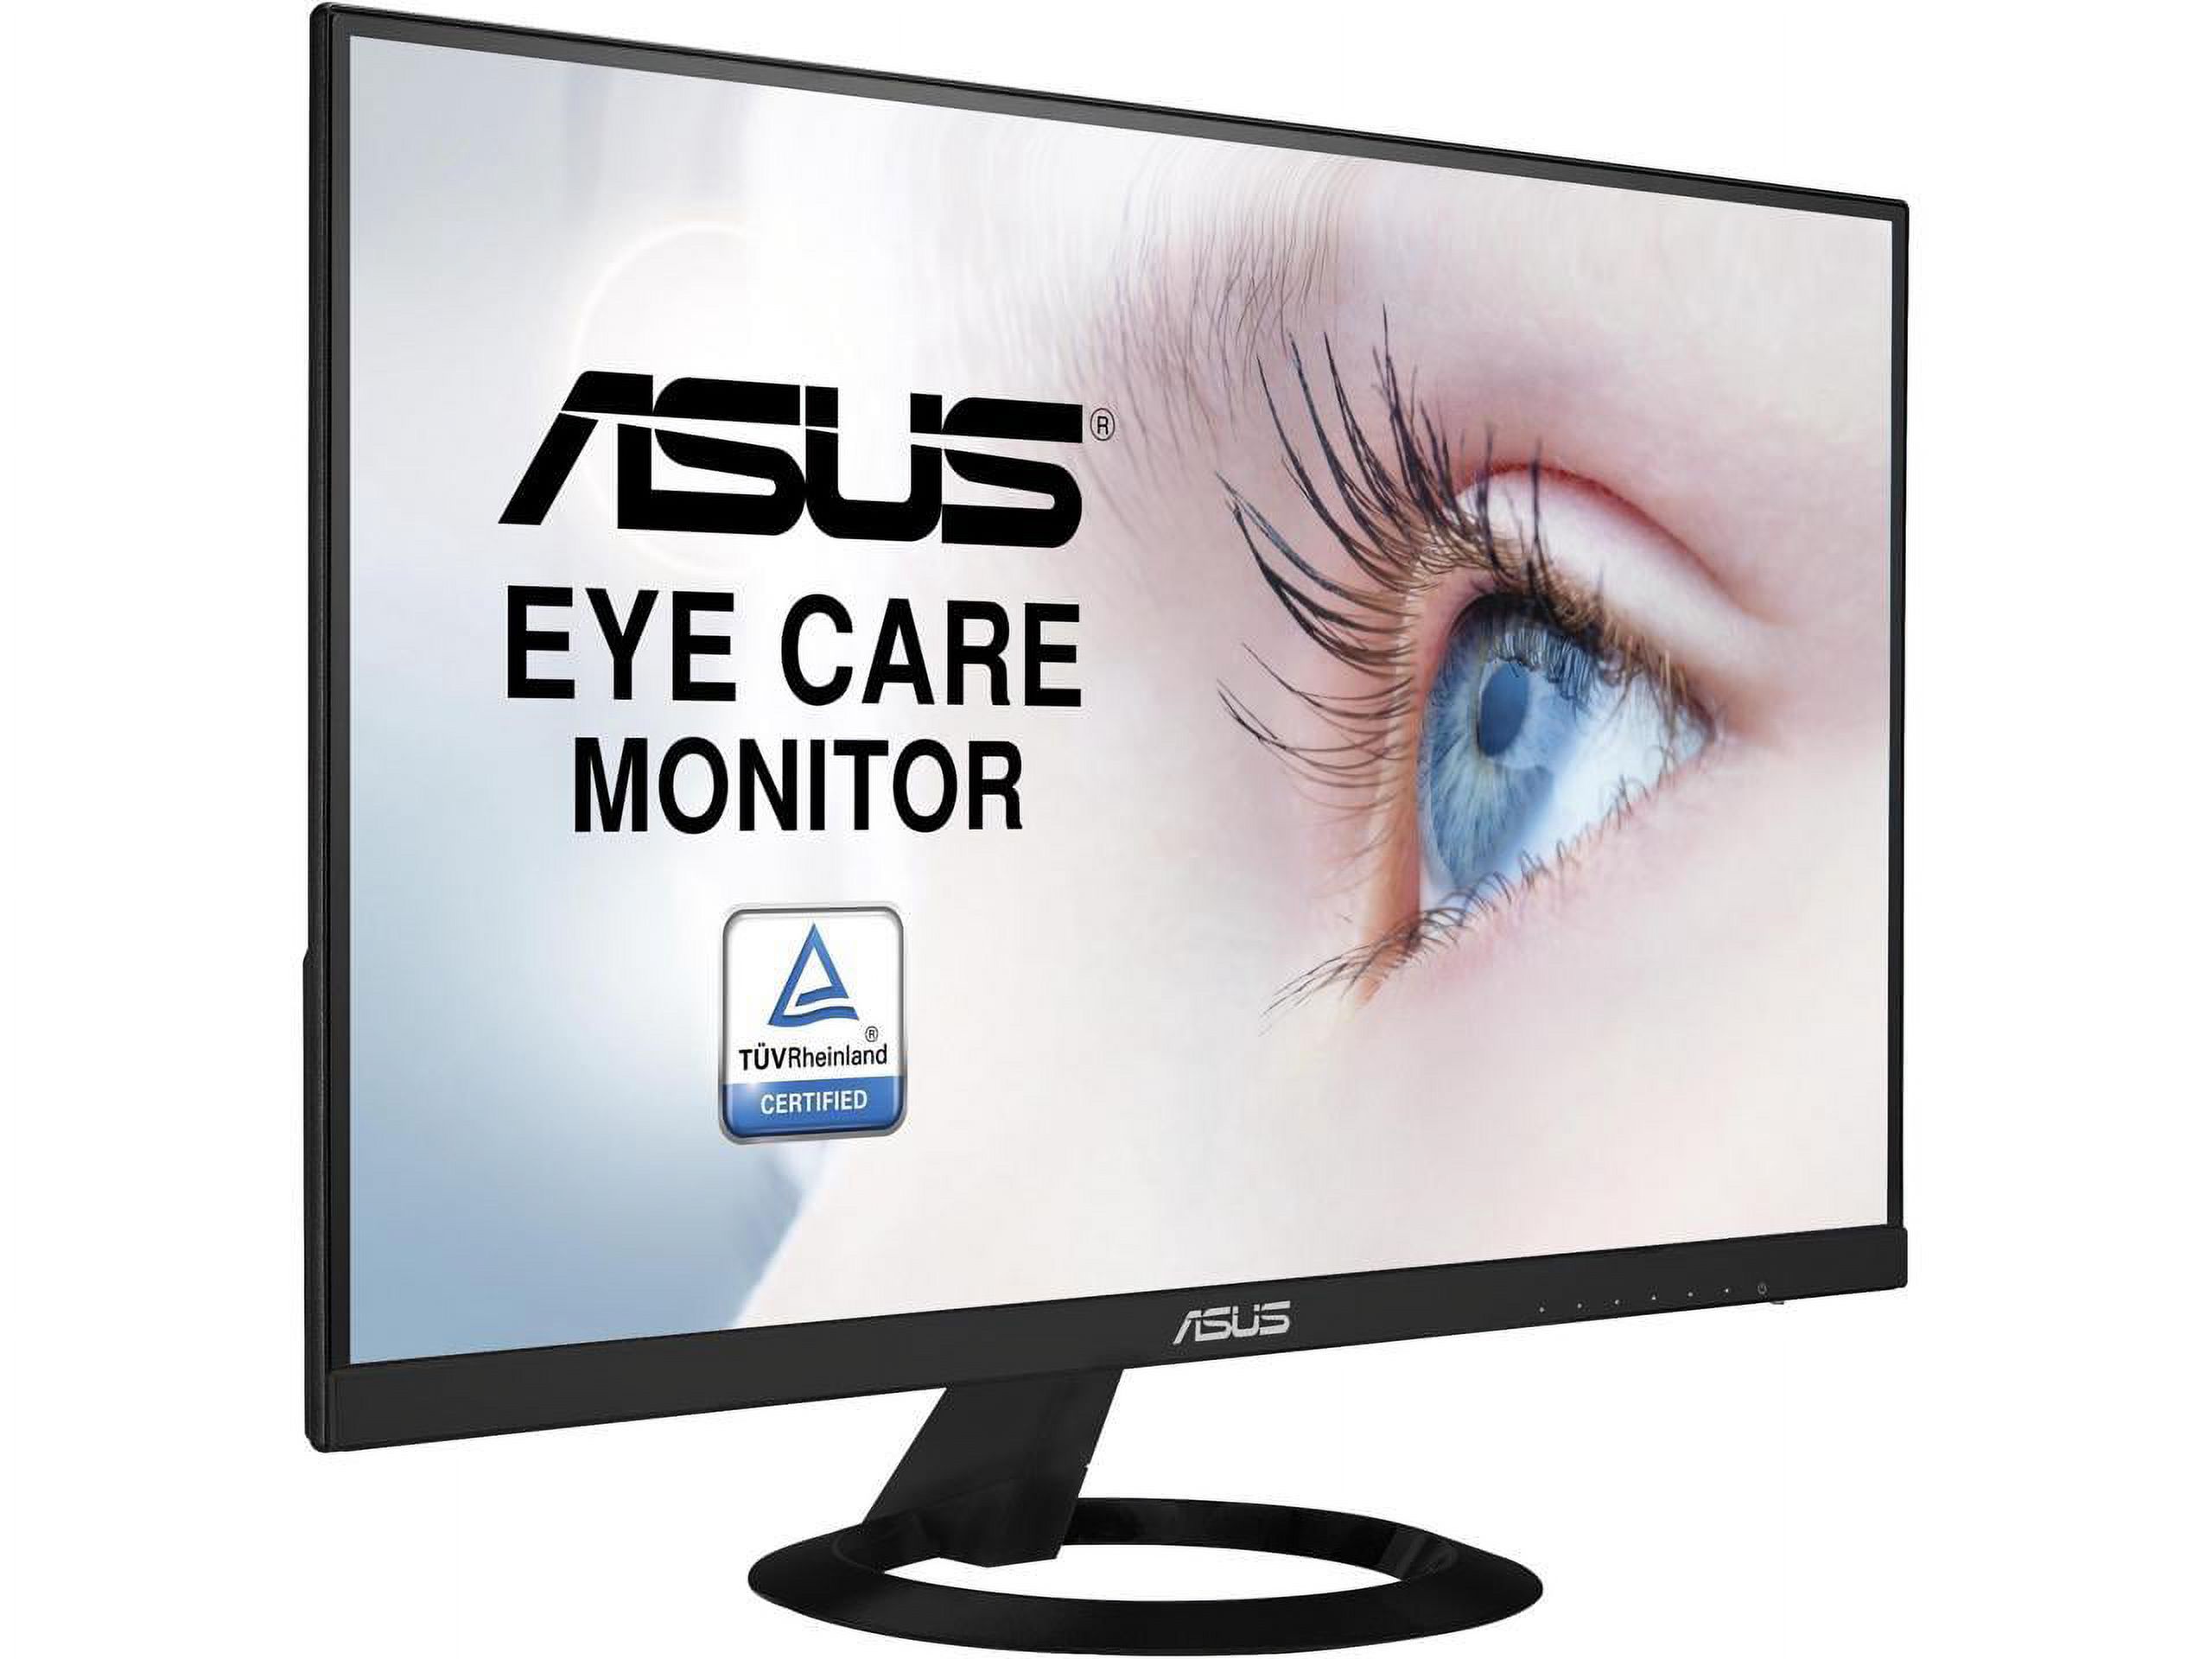 ASUS VZ279HE 27” Full HD 1080p IPS Eye Care Monitor with HDMI and VGA - image 3 of 5